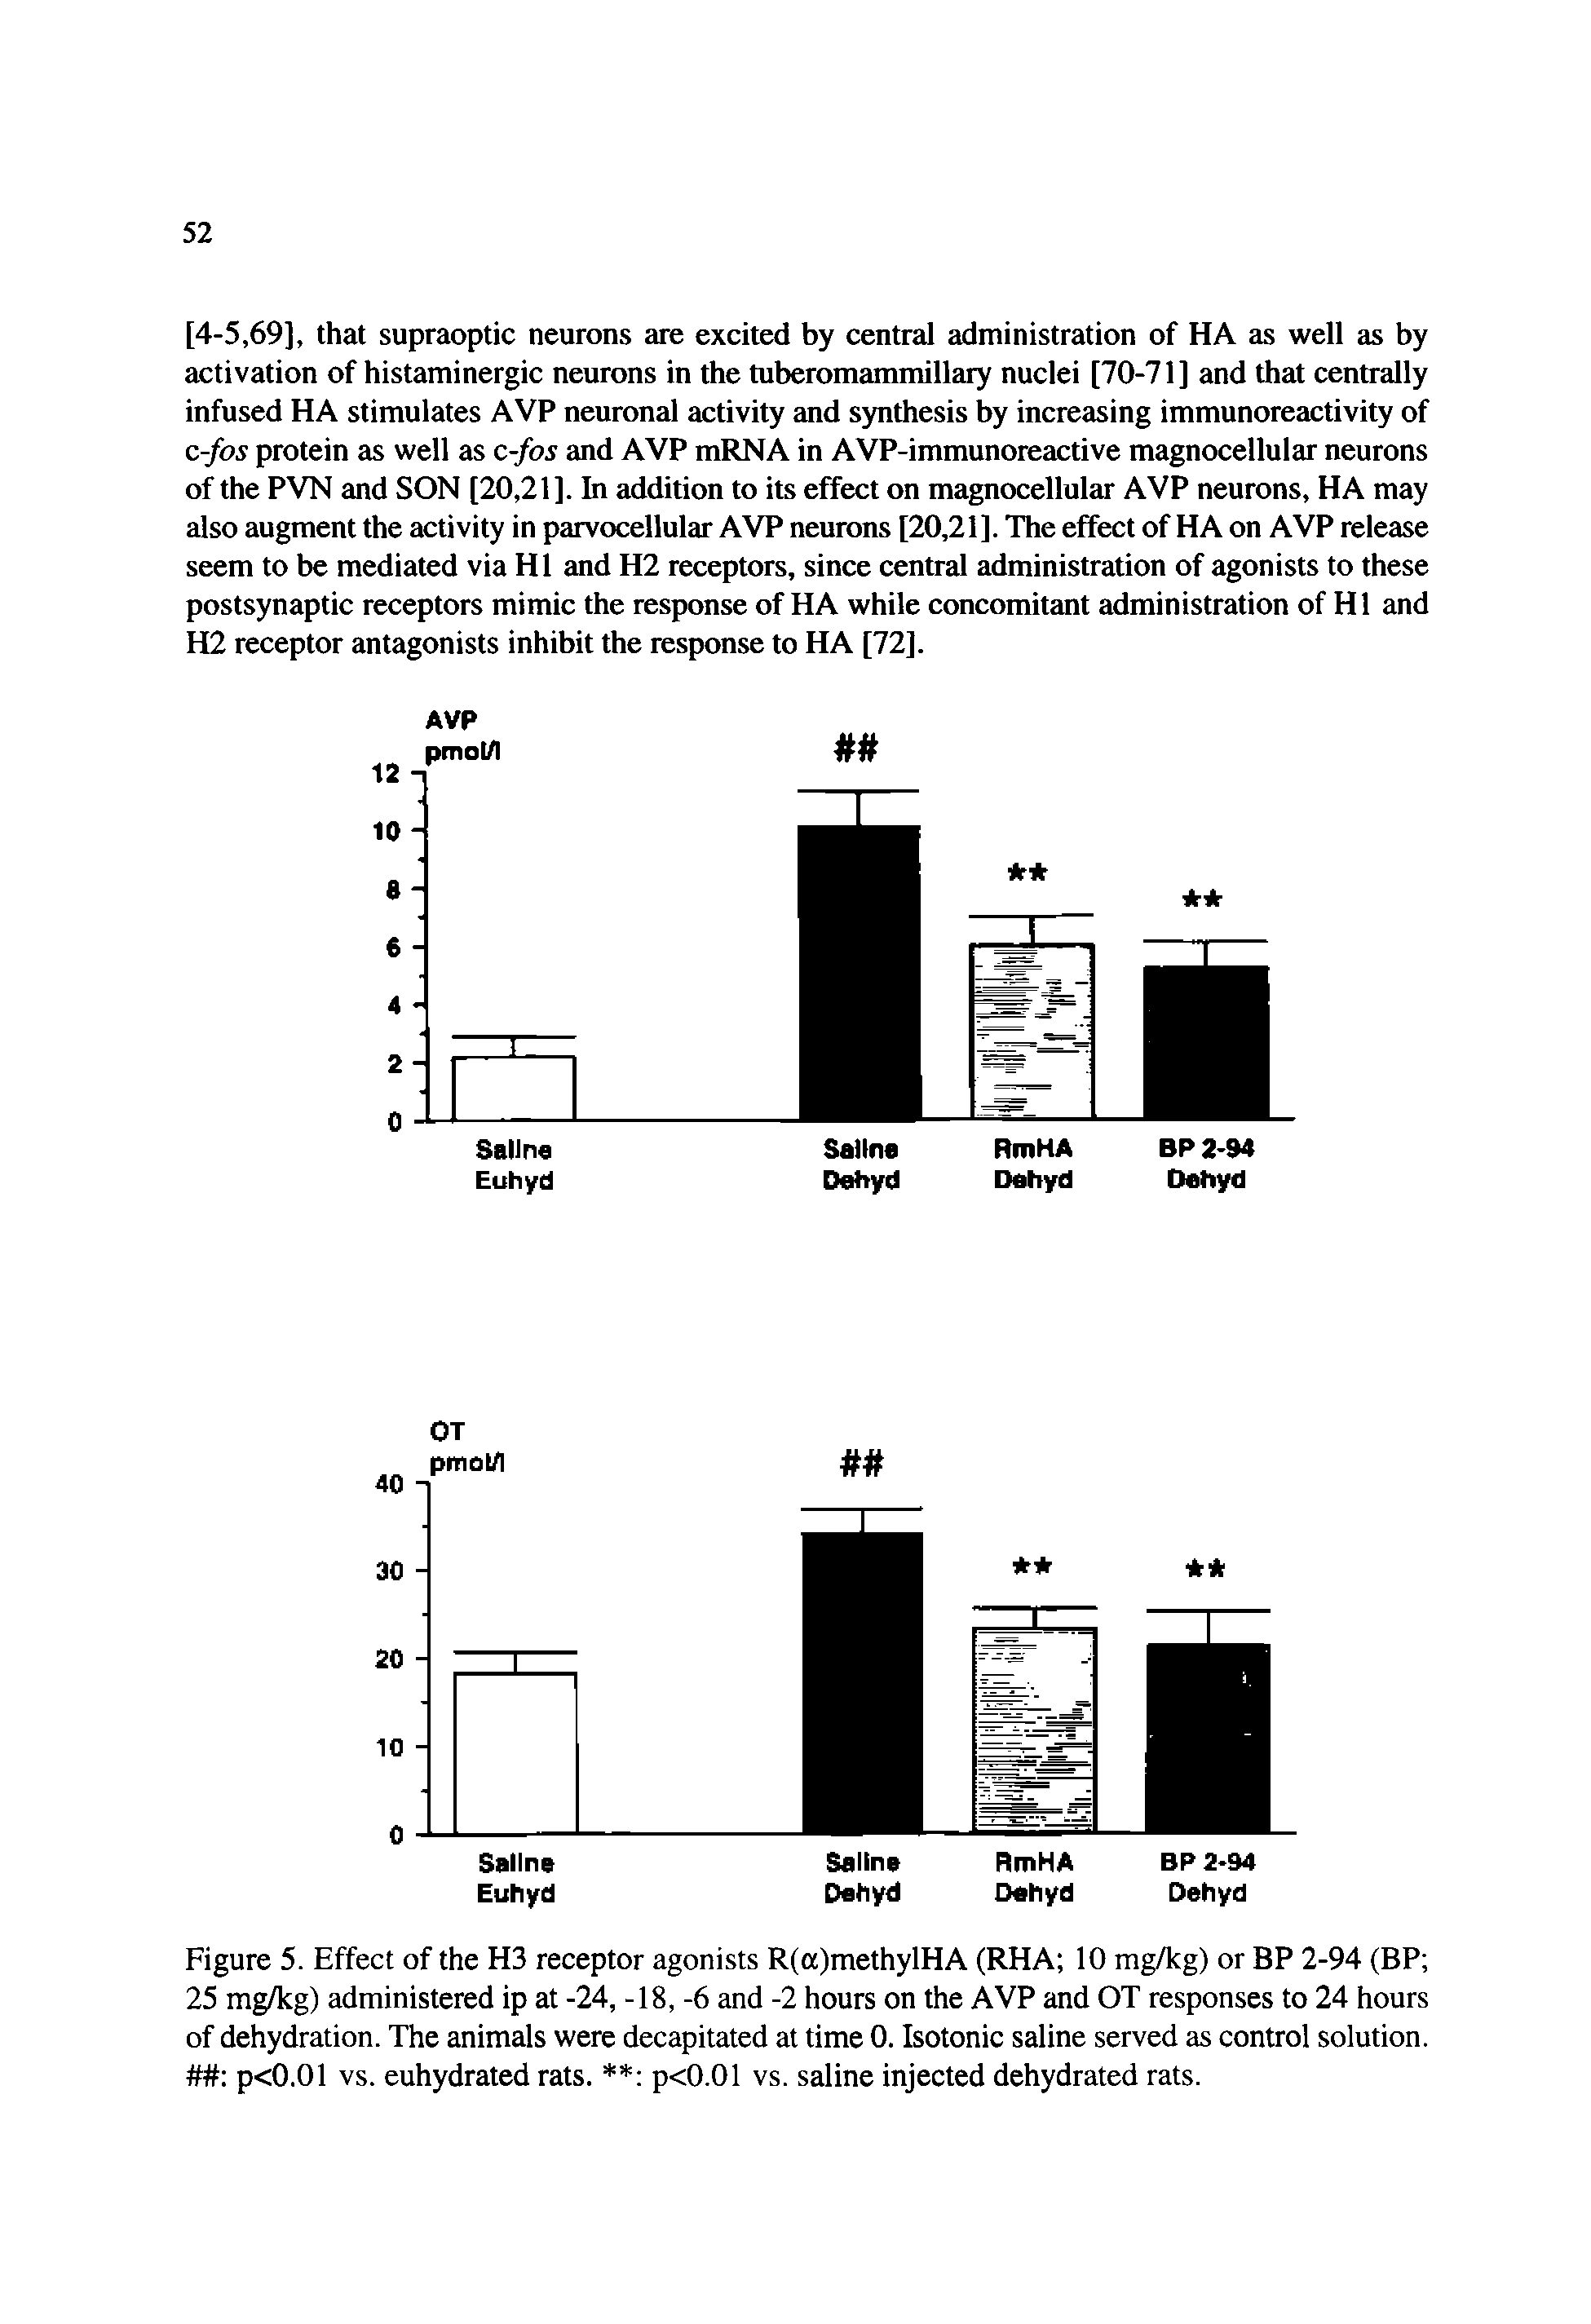 Figure 5. Effect of the H3 receptor agonists R(a)methylHA (RHA 10 mg/kg) or BP 2-94 (BP 25 mg/kg) administered ip at -24, -18,-6 and -2 hours on the AVP and OT responses to 24 hours of dehydration. The animals were decapitated at time 0. Isotonic saline served as control solution. p<0.01 vs. euhydrated rats. p<0.01 vs. saline injected dehydrated rats.